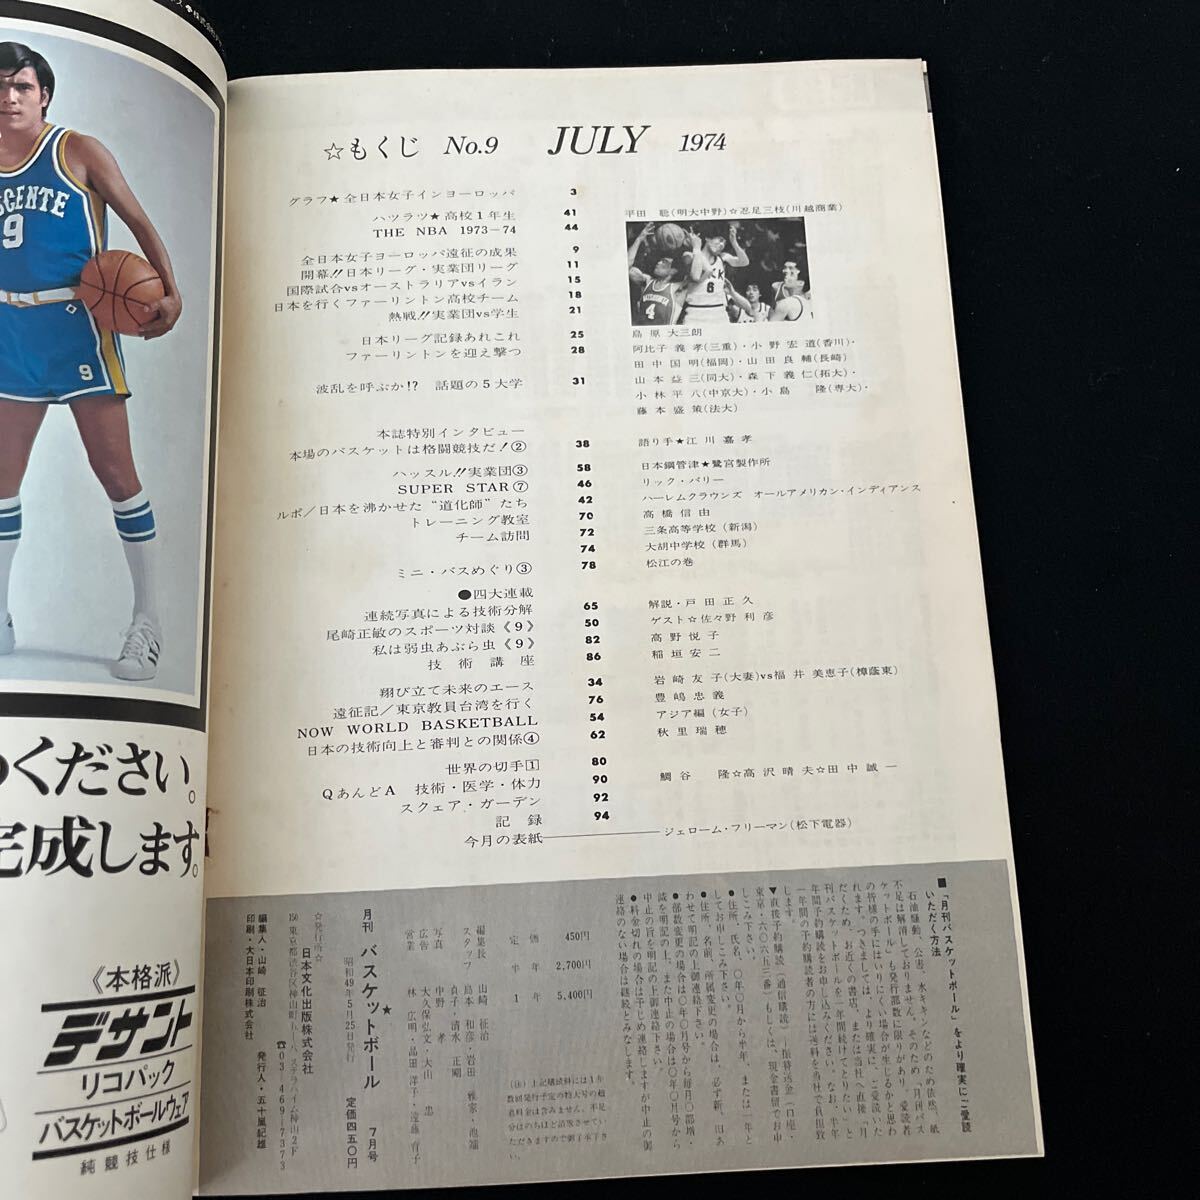  monthly basketball 0 Showa era 49 year 5 month 25 day issue 0 all Japan woman Europe ... ..0 basketball 0 Mini bus 0 day text . publish corporation 